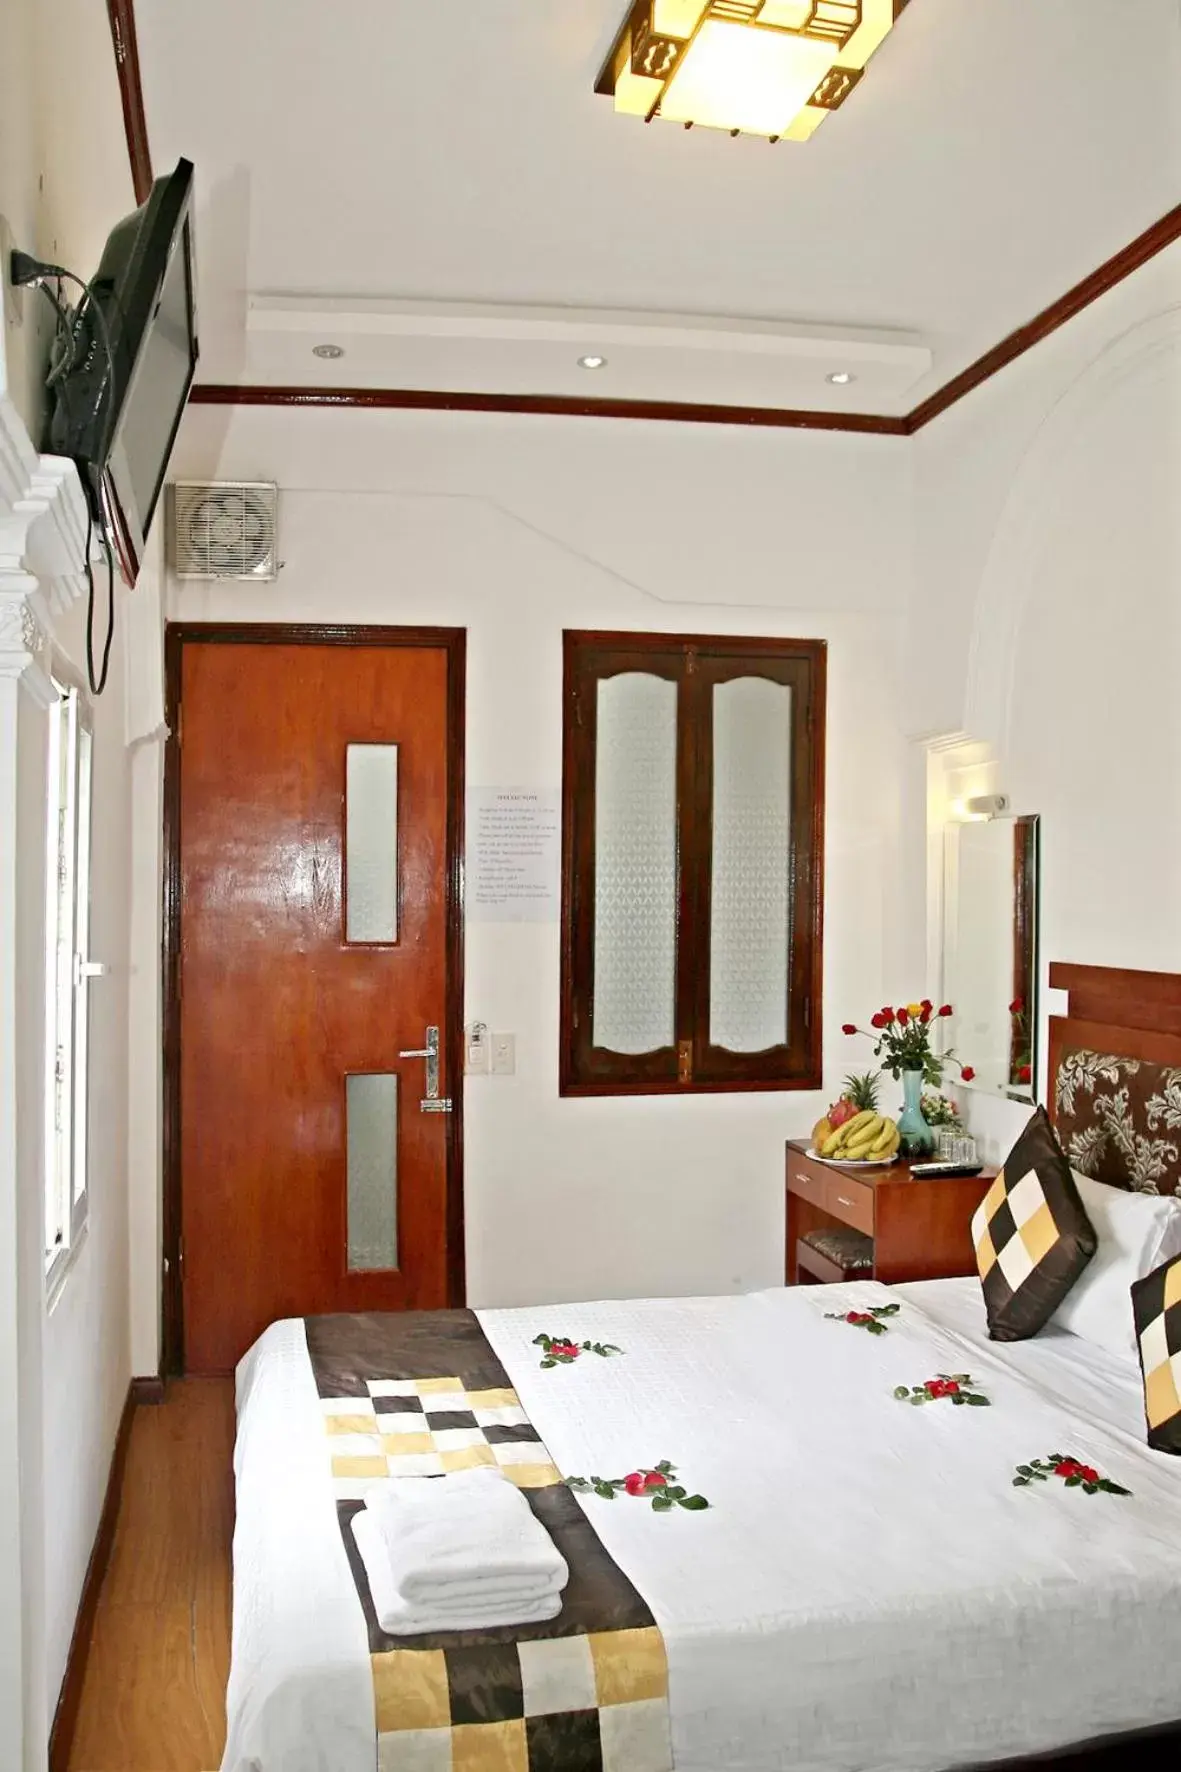 Asia Guest House